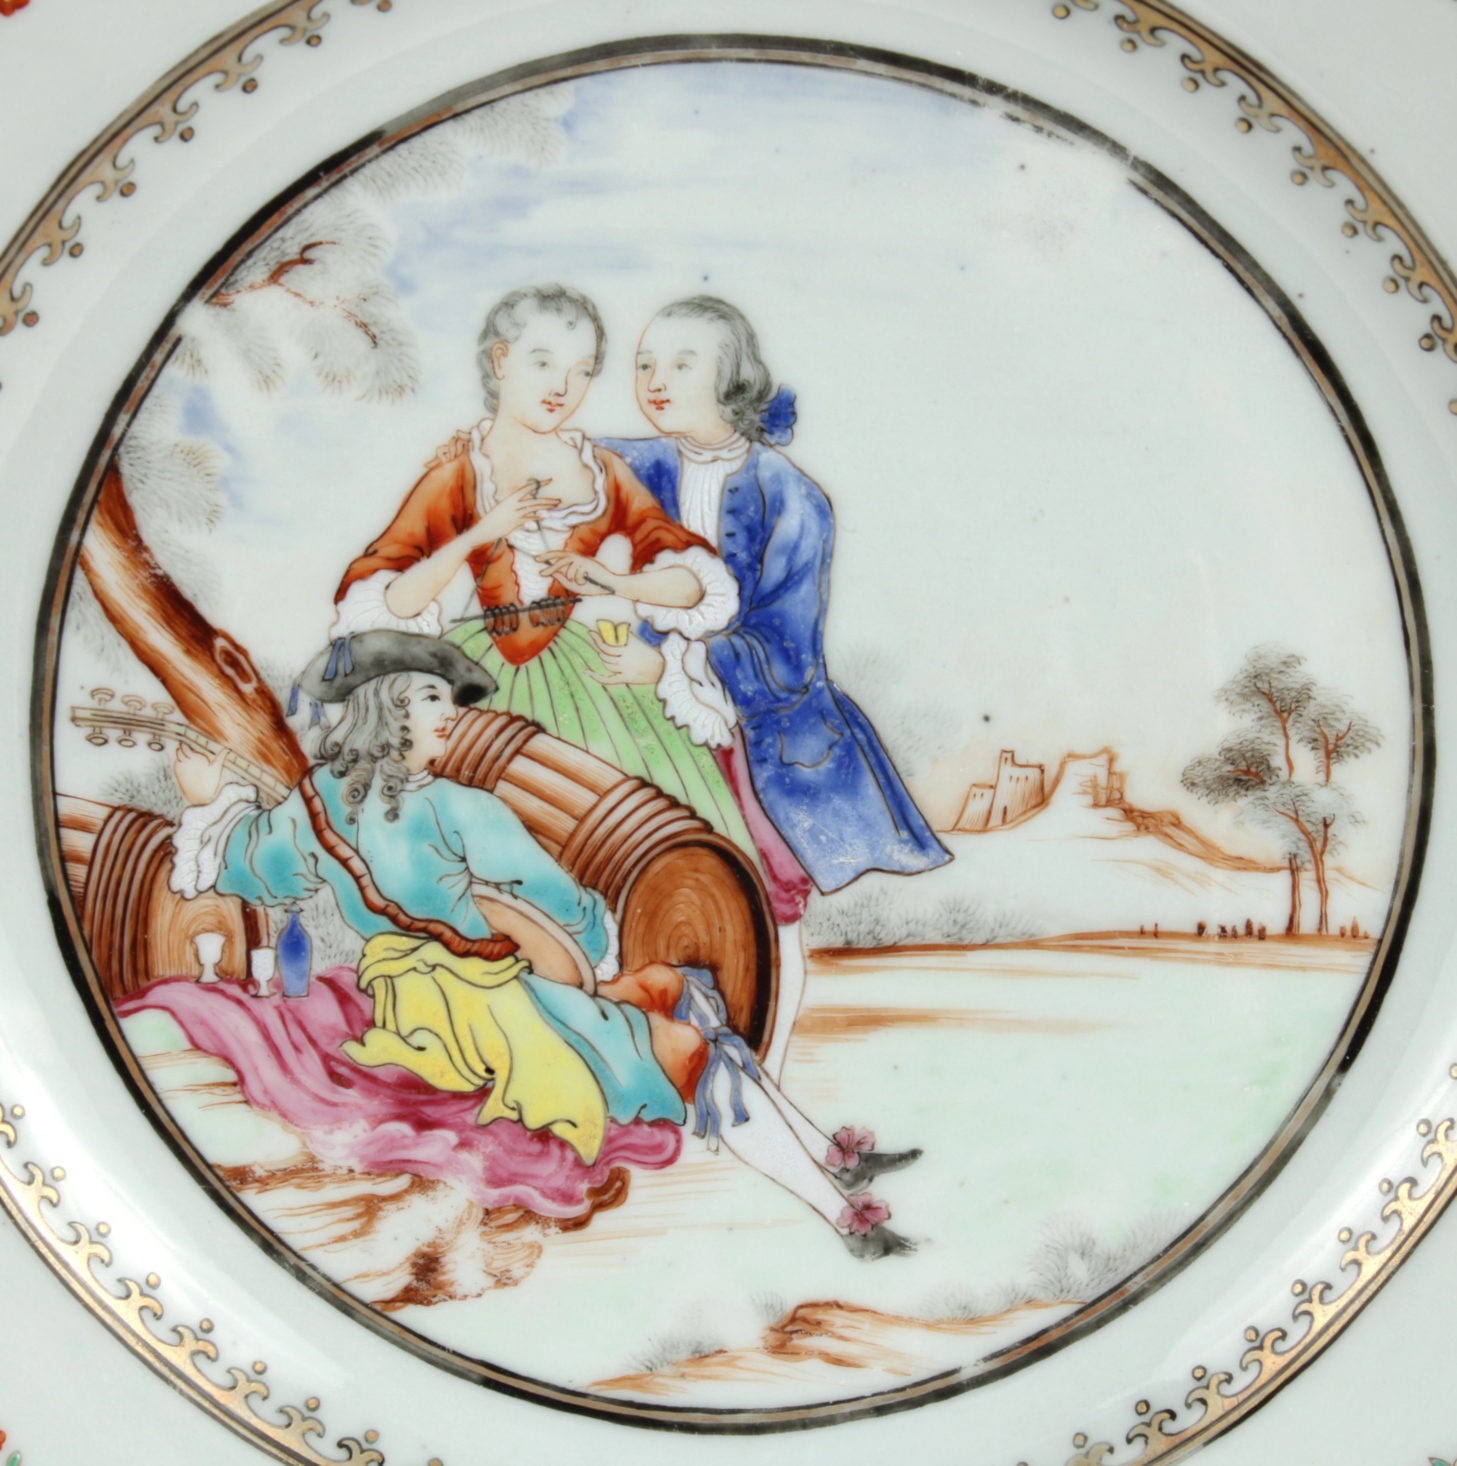 Chinese Export Plate Decorated with a Music Party, c. 1745